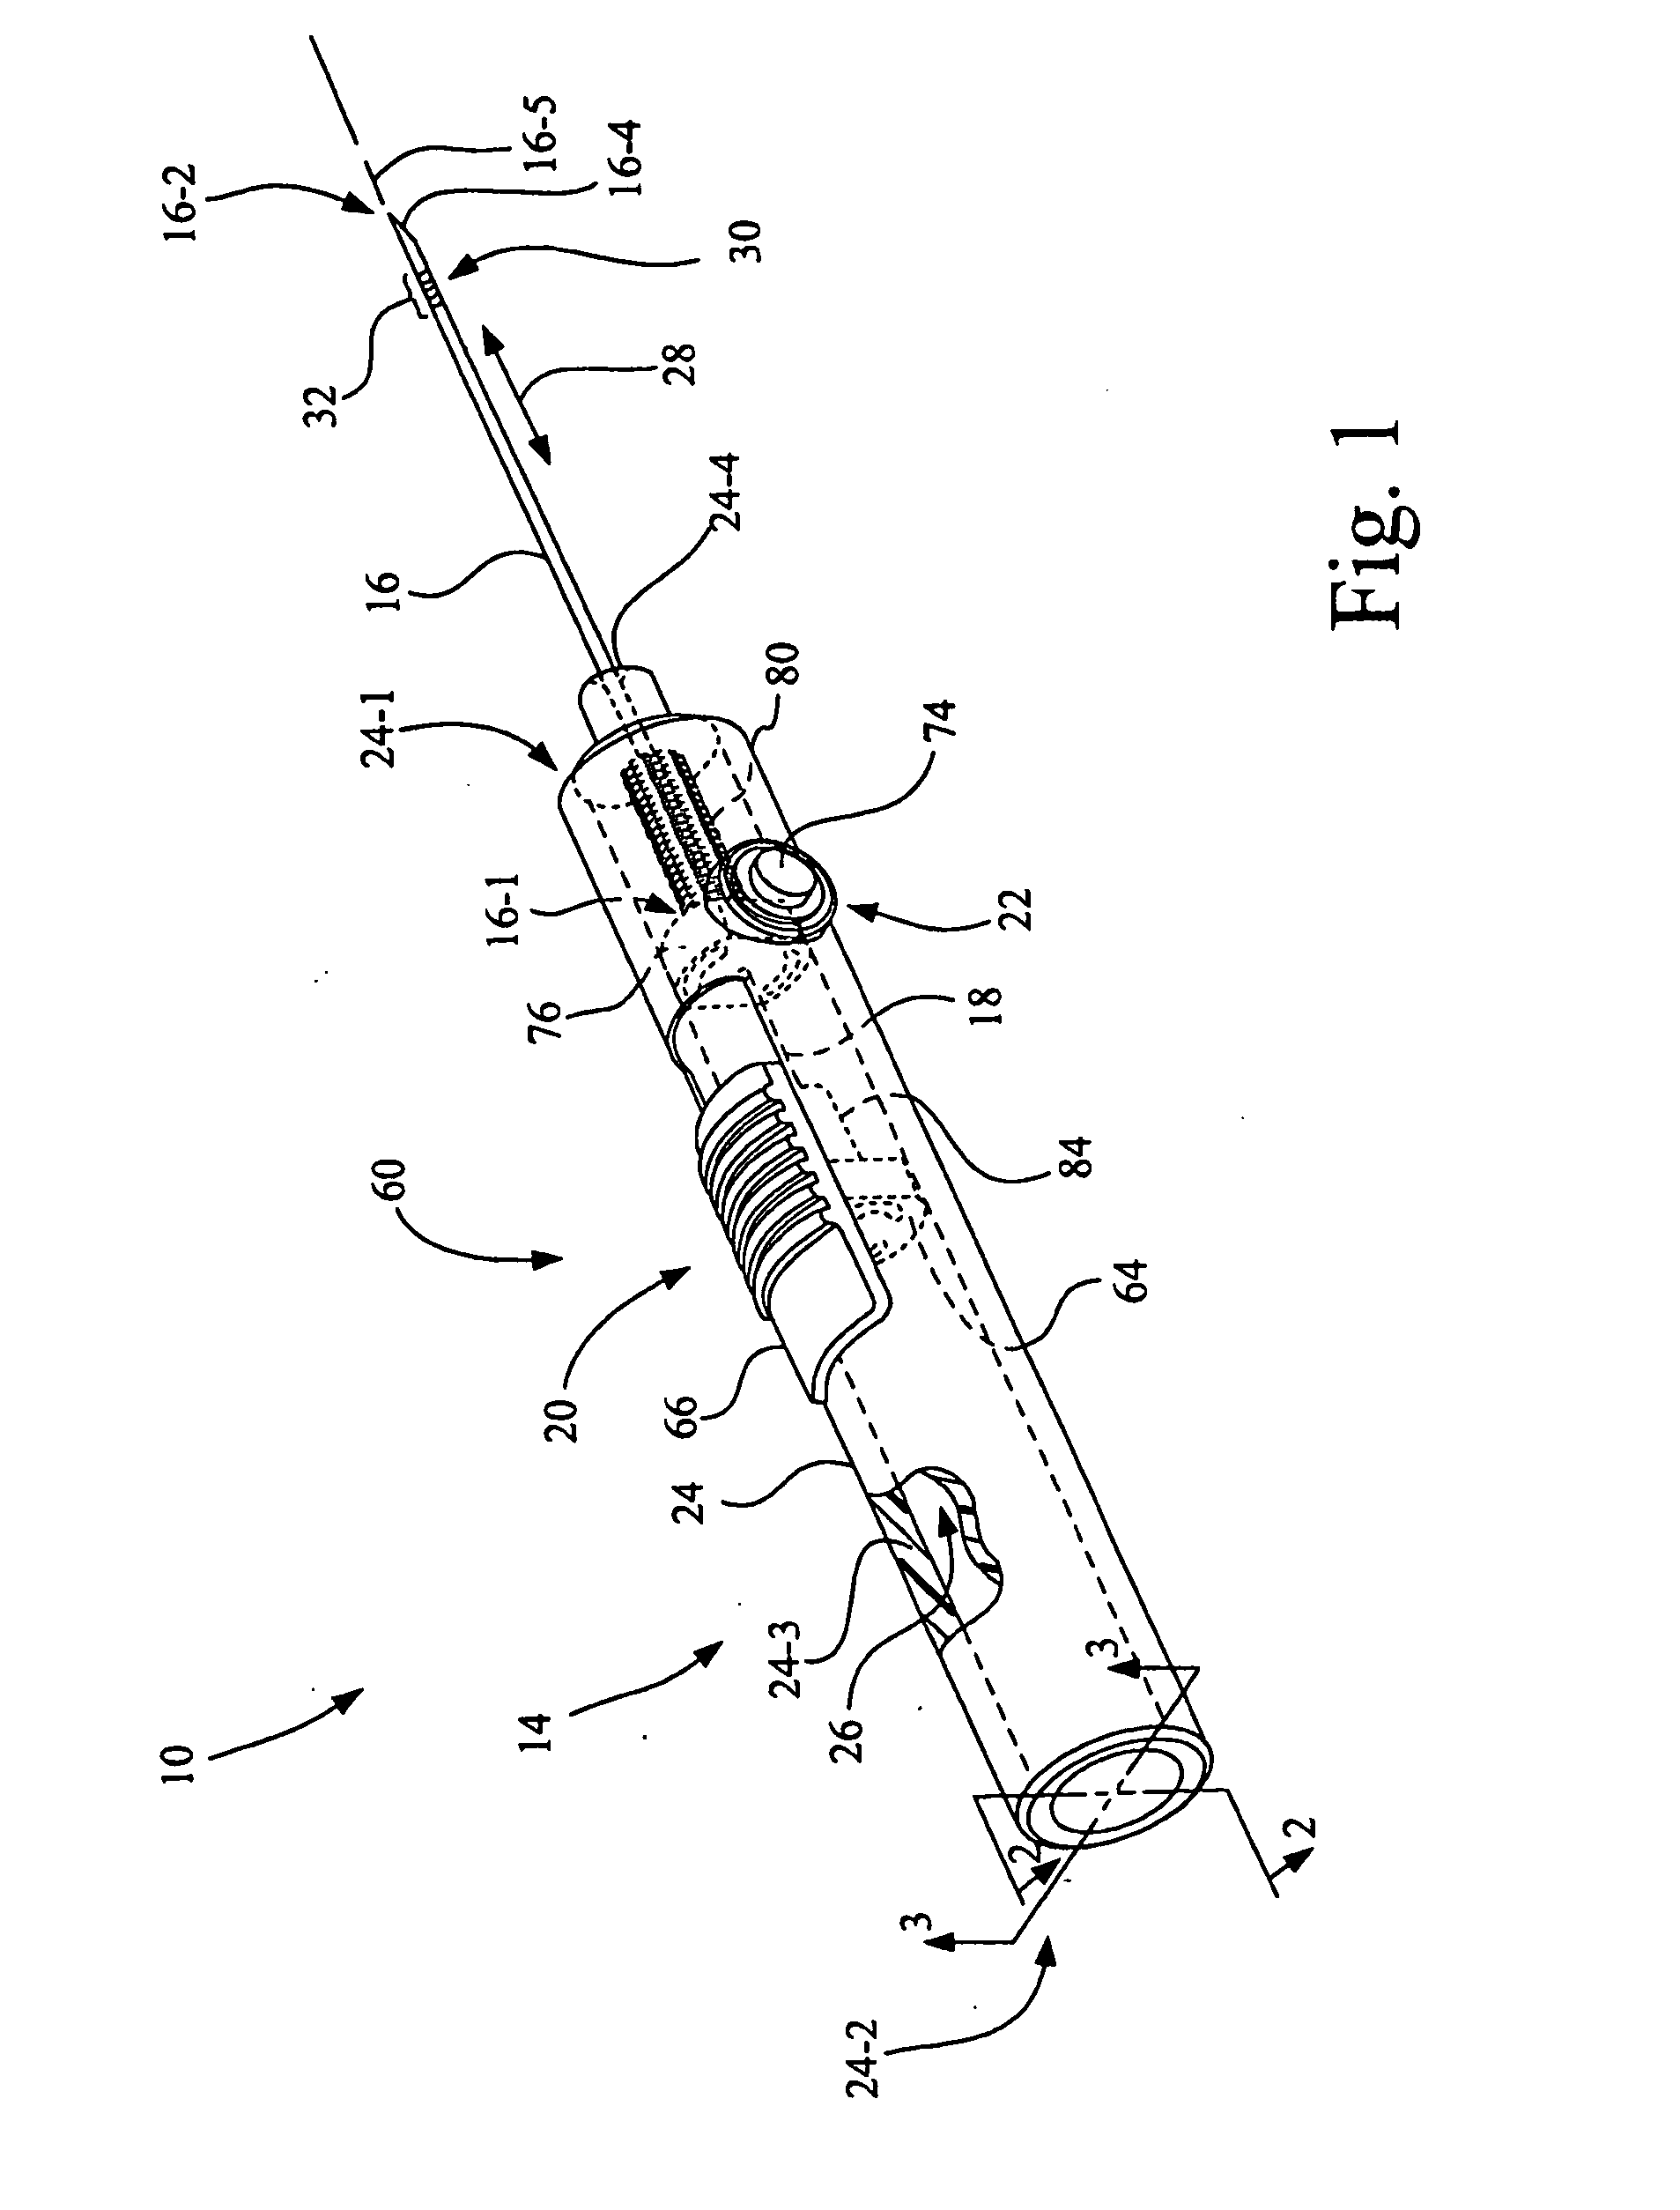 Marker delivery device for tissue marker placement